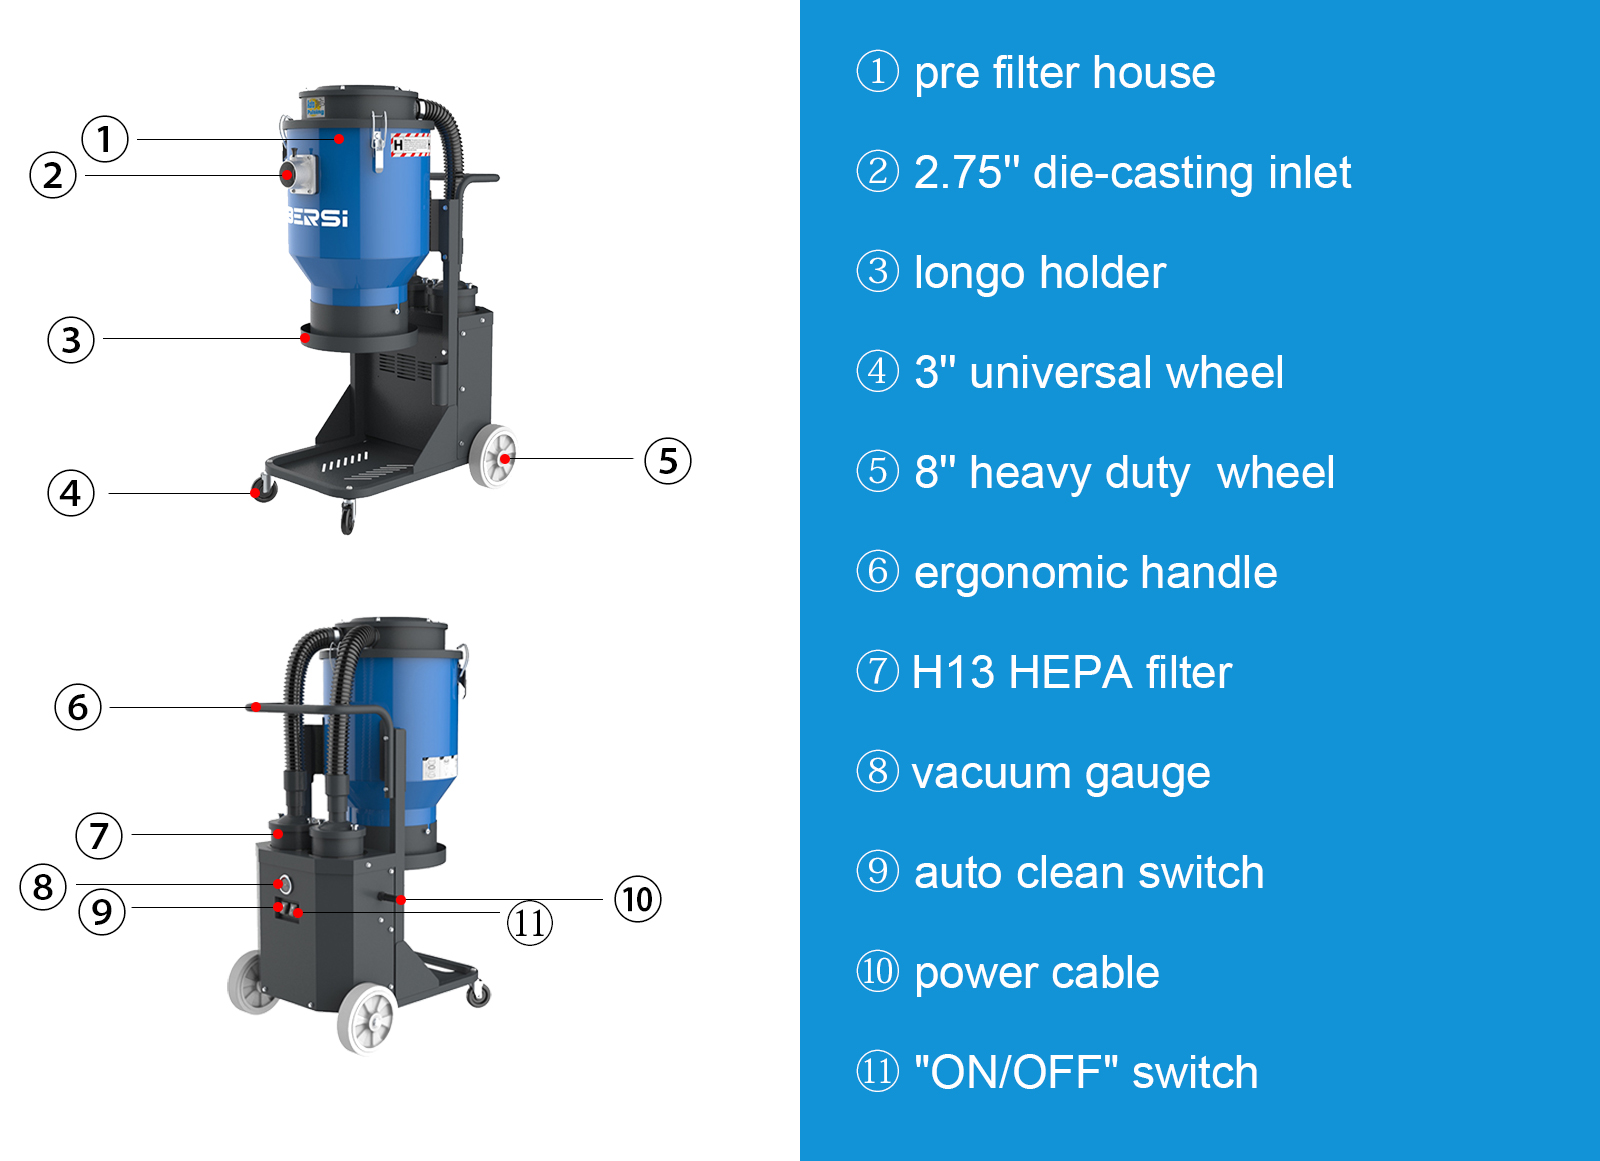 AC22 dust extractor details